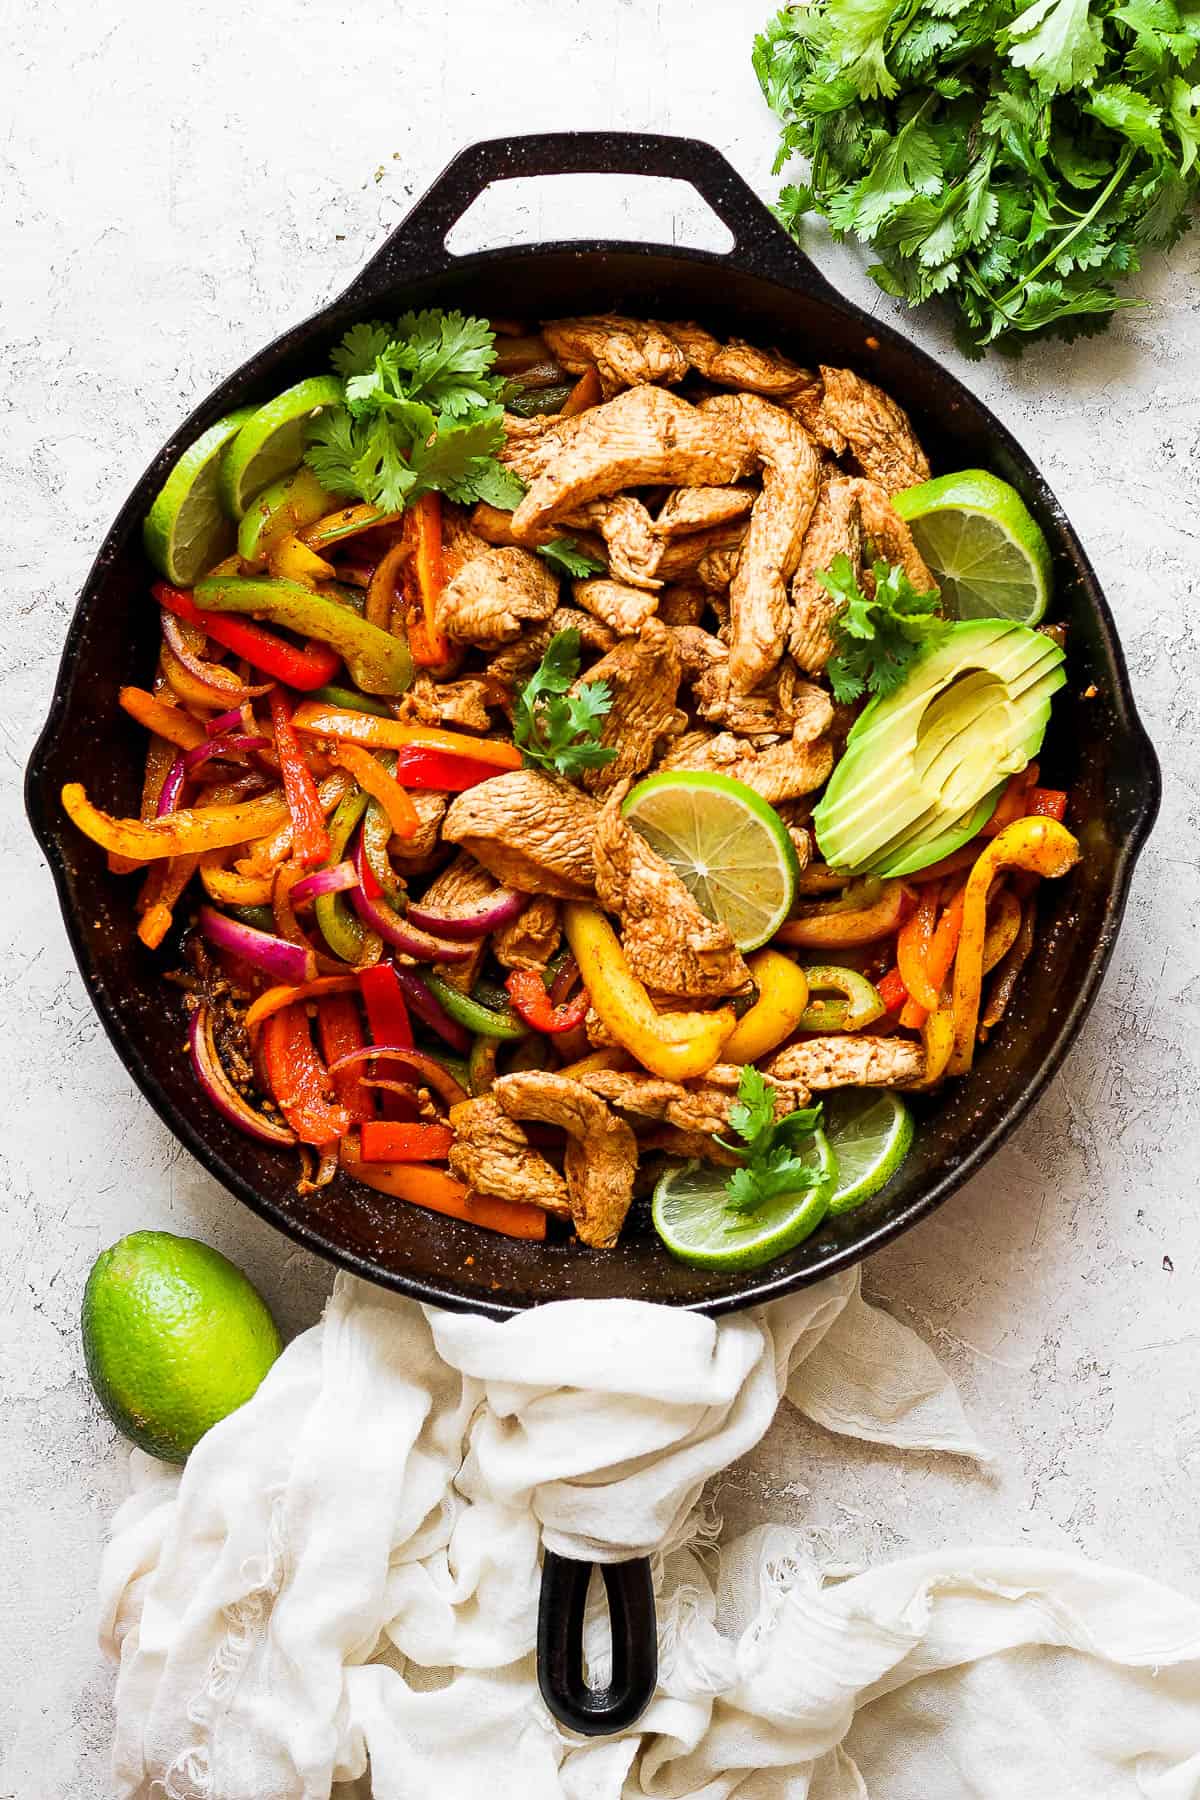 Marinated chicken tenders cooked in a cast iron skillet with fajita veggies.